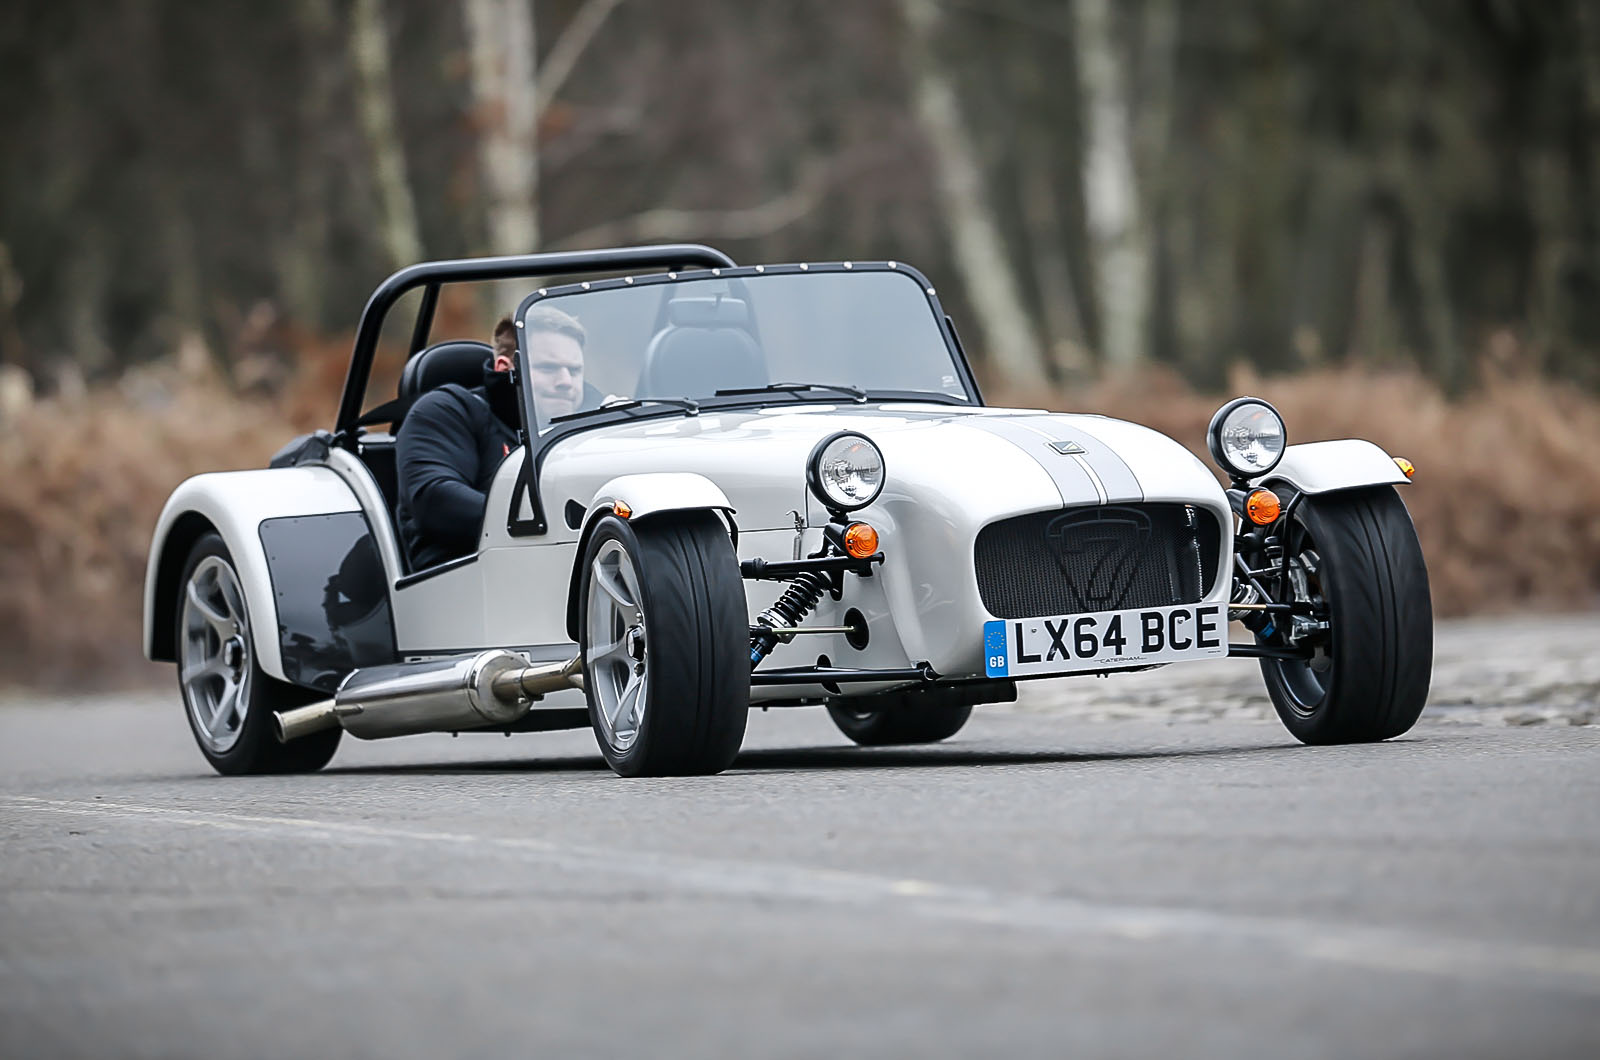 Amazing Caterham Pictures & Backgrounds